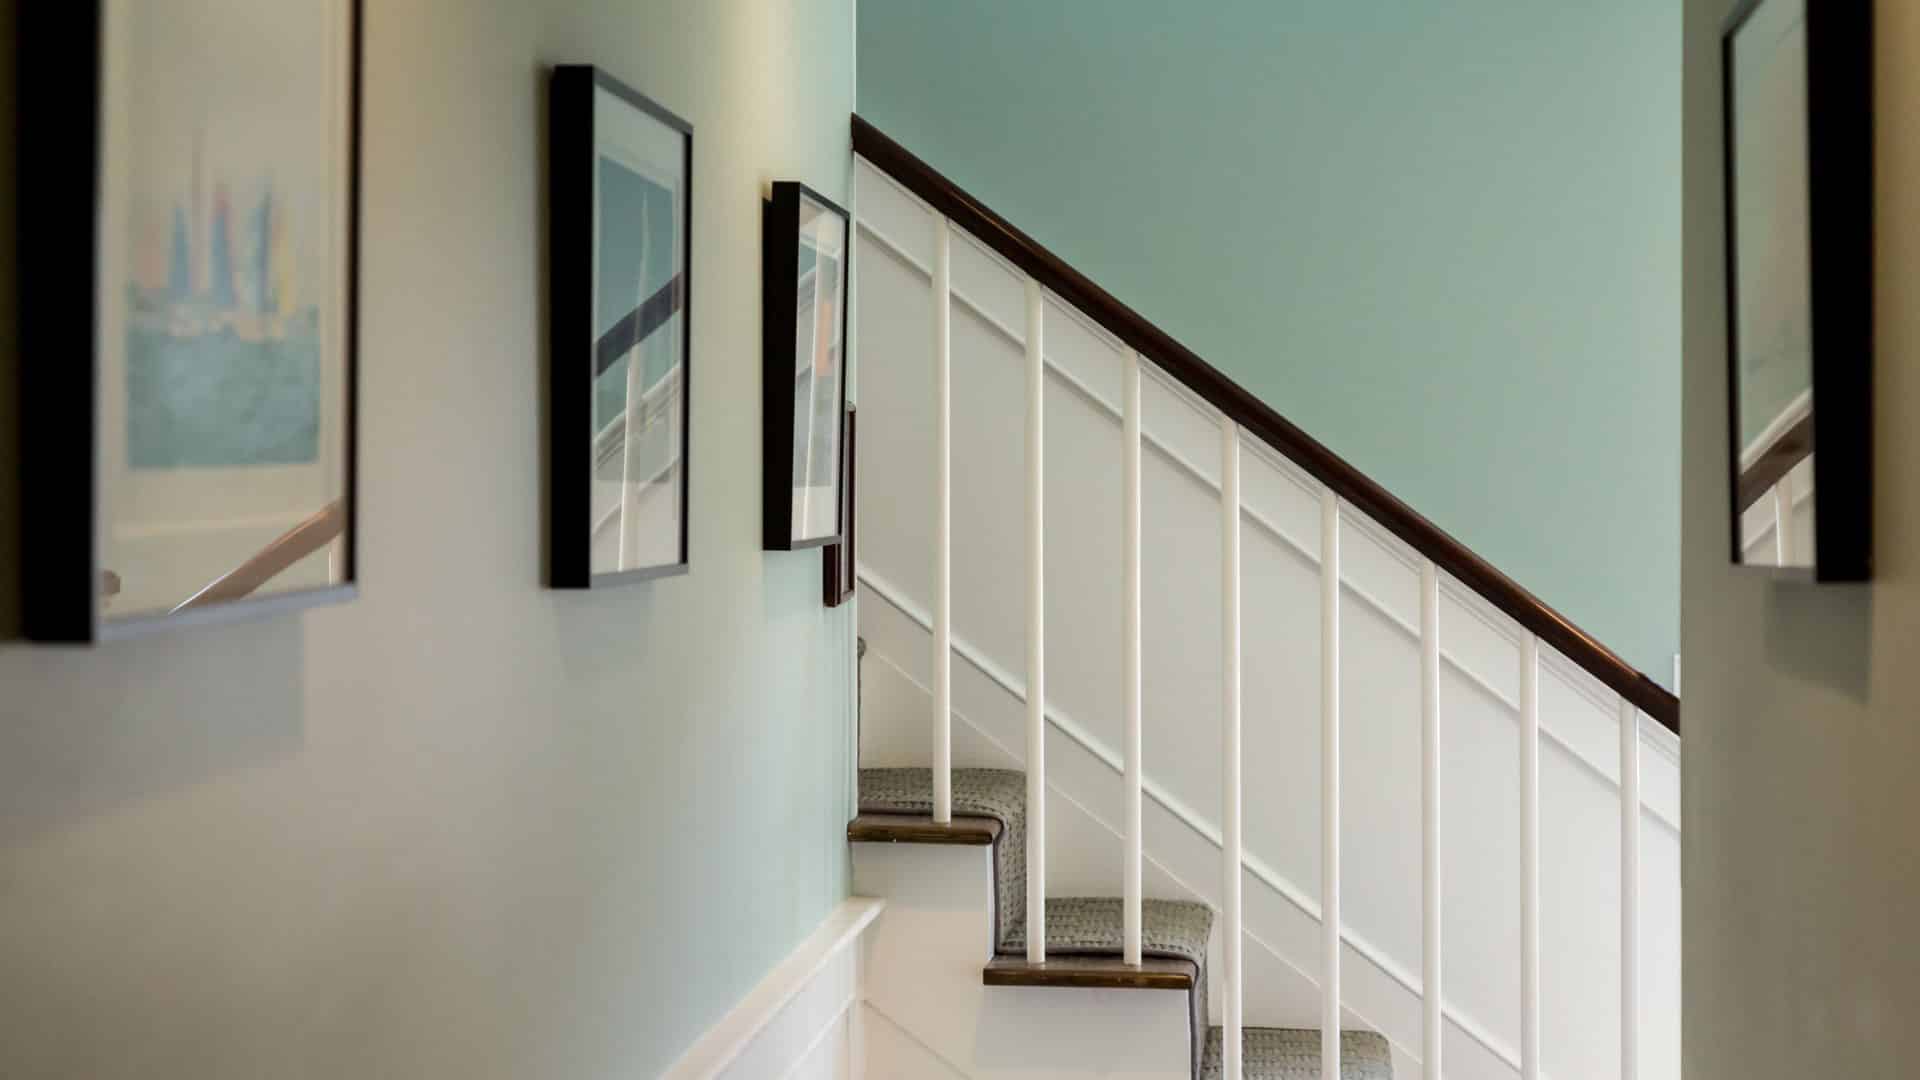 Hallway with mint green walls, white paneling, dark wooden stairs, and pictures hanging on the walls